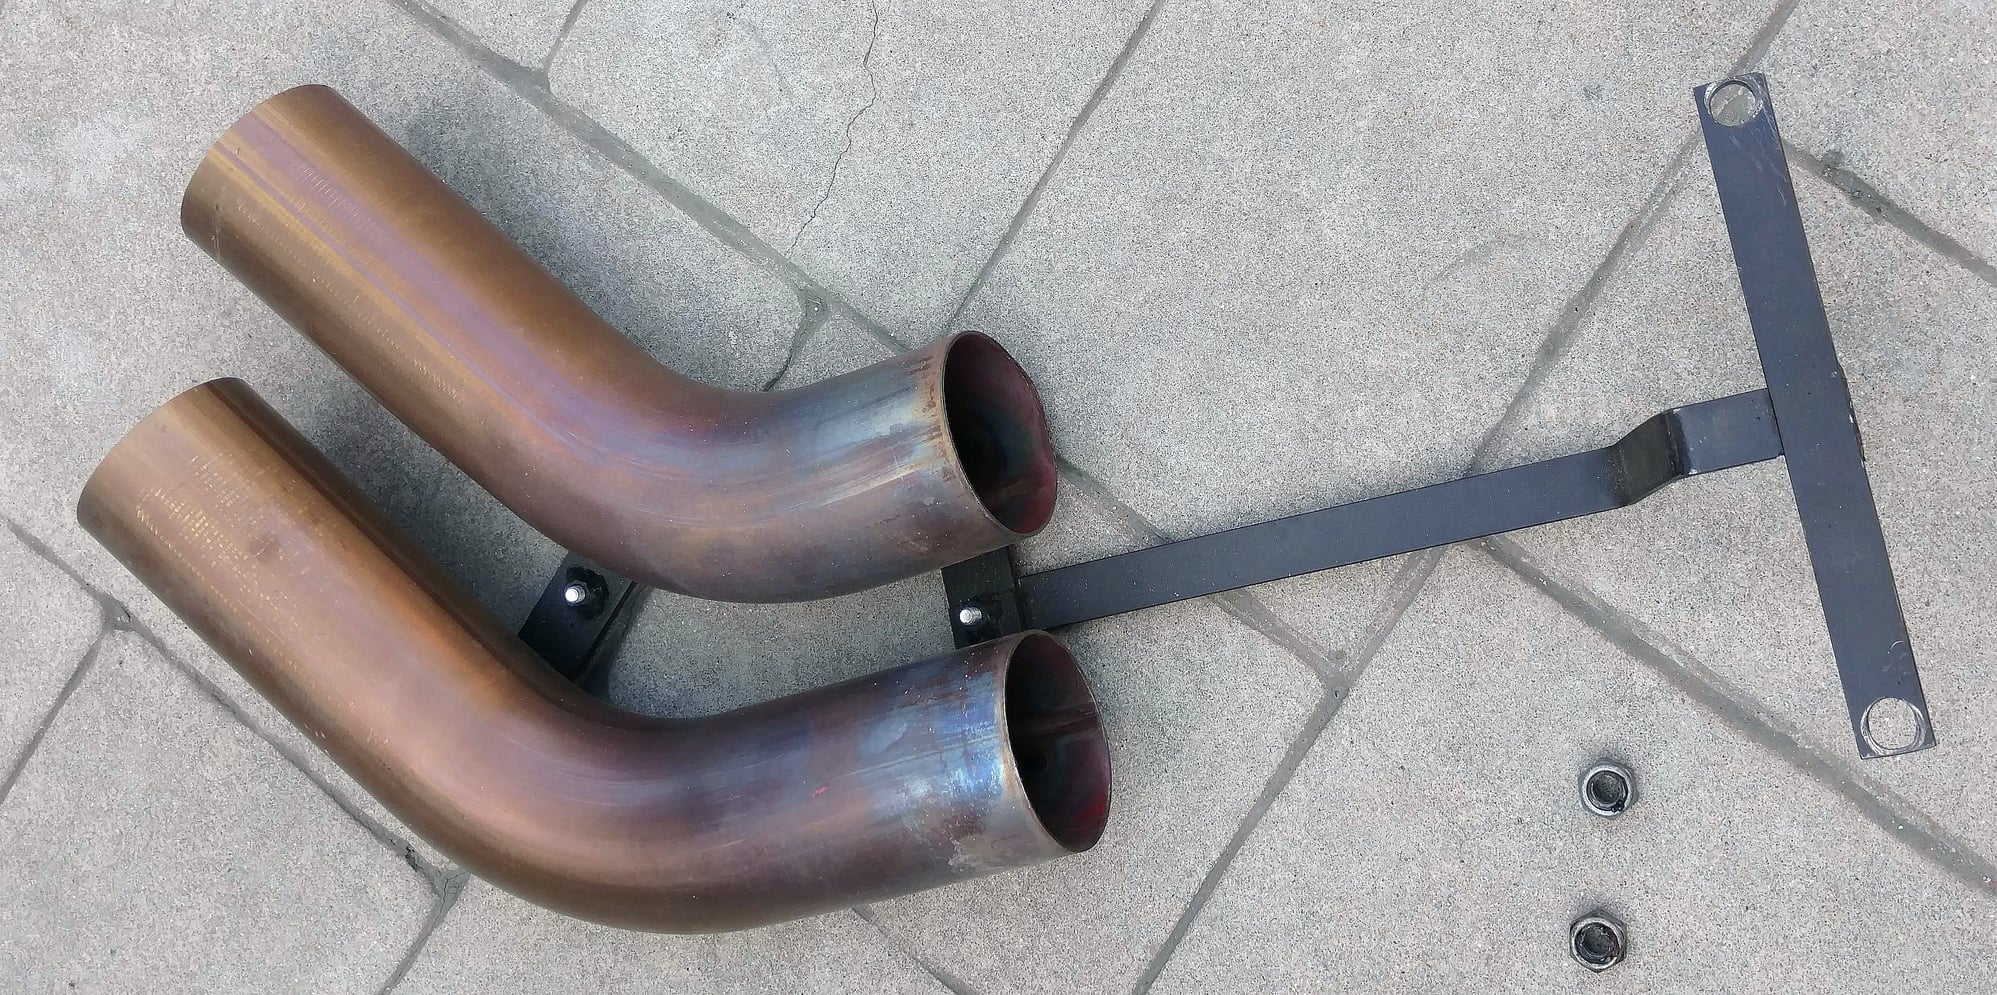 Engine - Exhaust - Laguna Seca turn away pipe for 981 with PSE - Used - Mountain View, CA 94040, United States